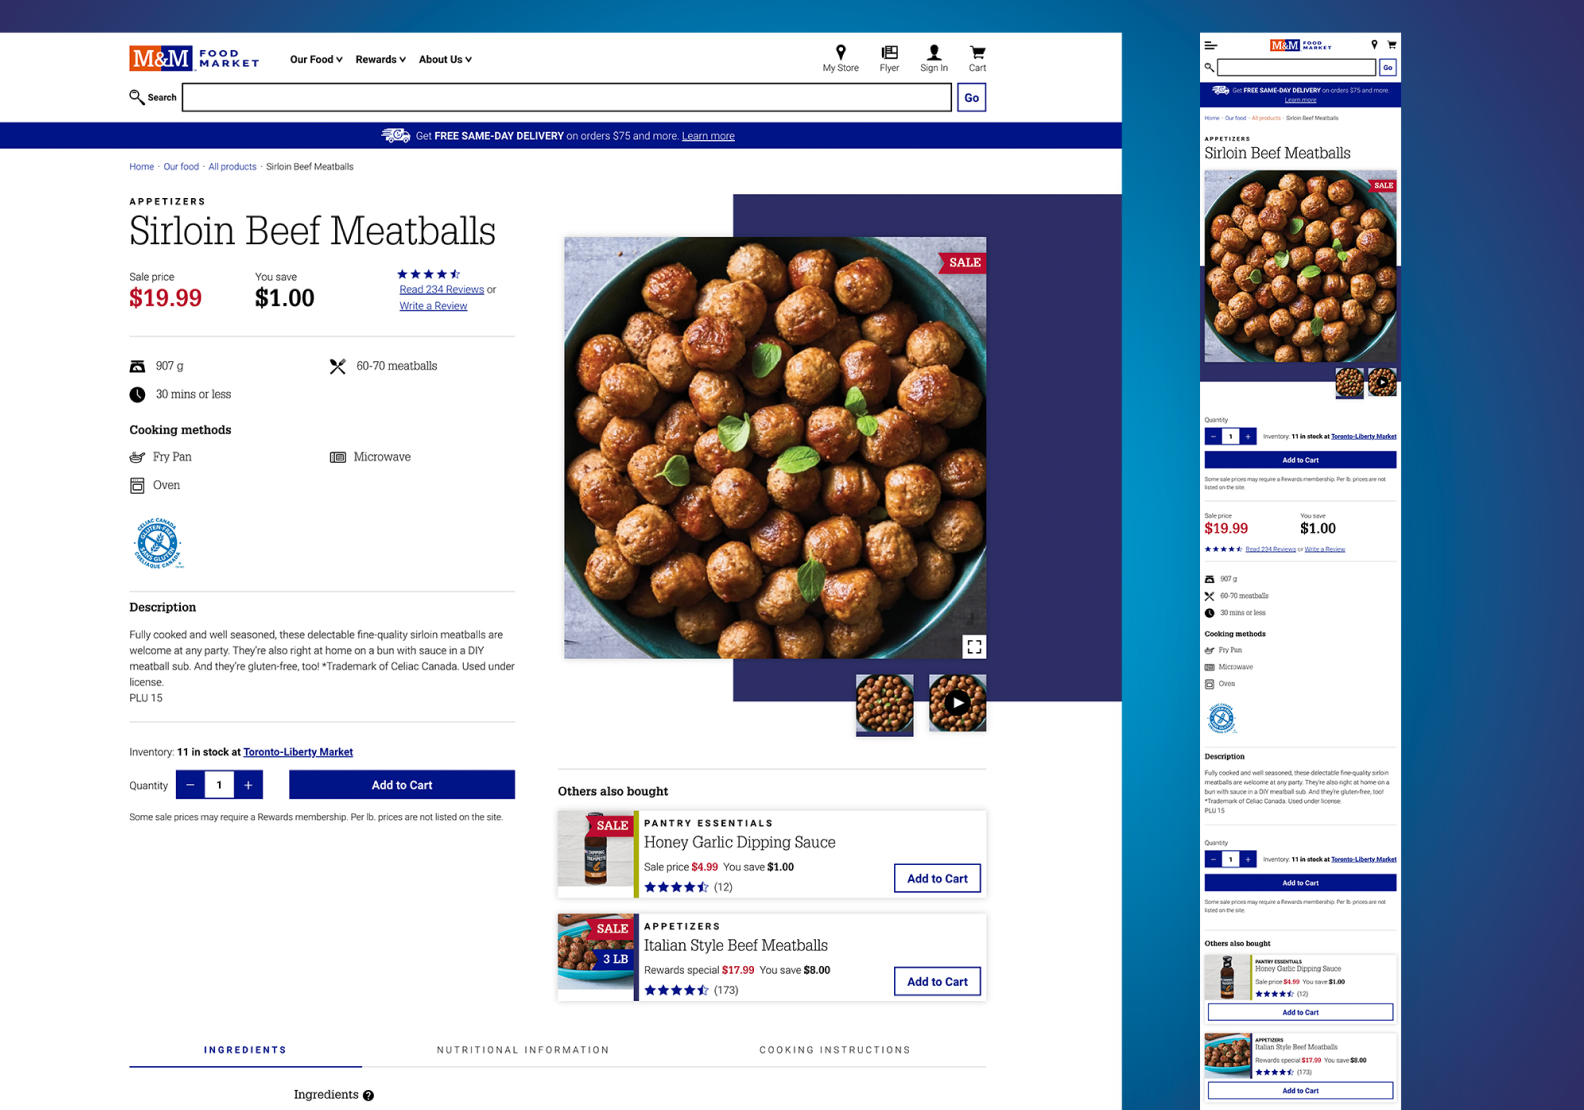 A desktop and mobile view of an M&M Food Market product page.